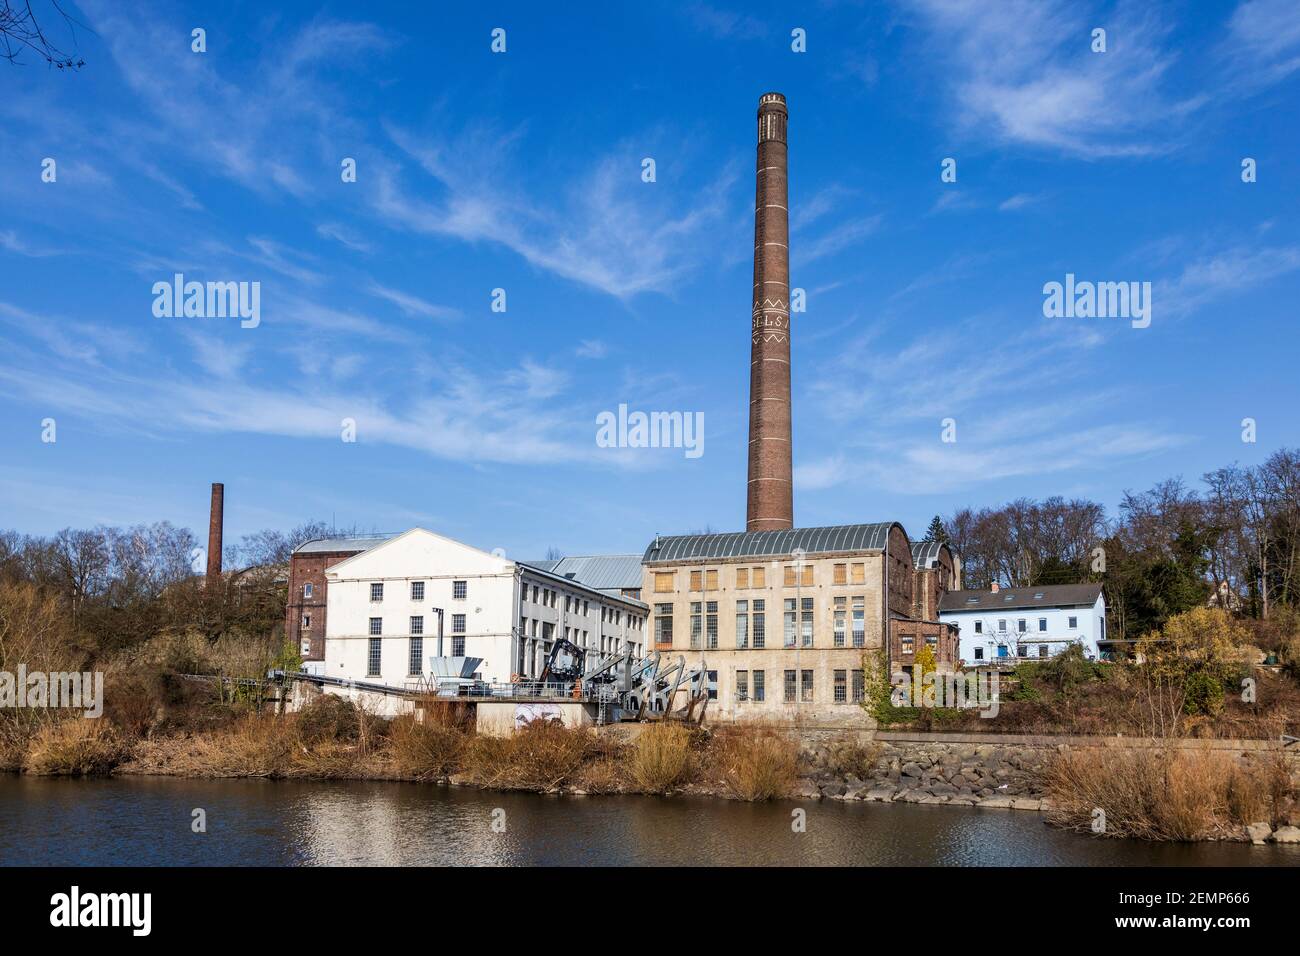 Hydro-electric power station Horster Mühle on the river Ruhr in Essen, Germany. Stock Photo